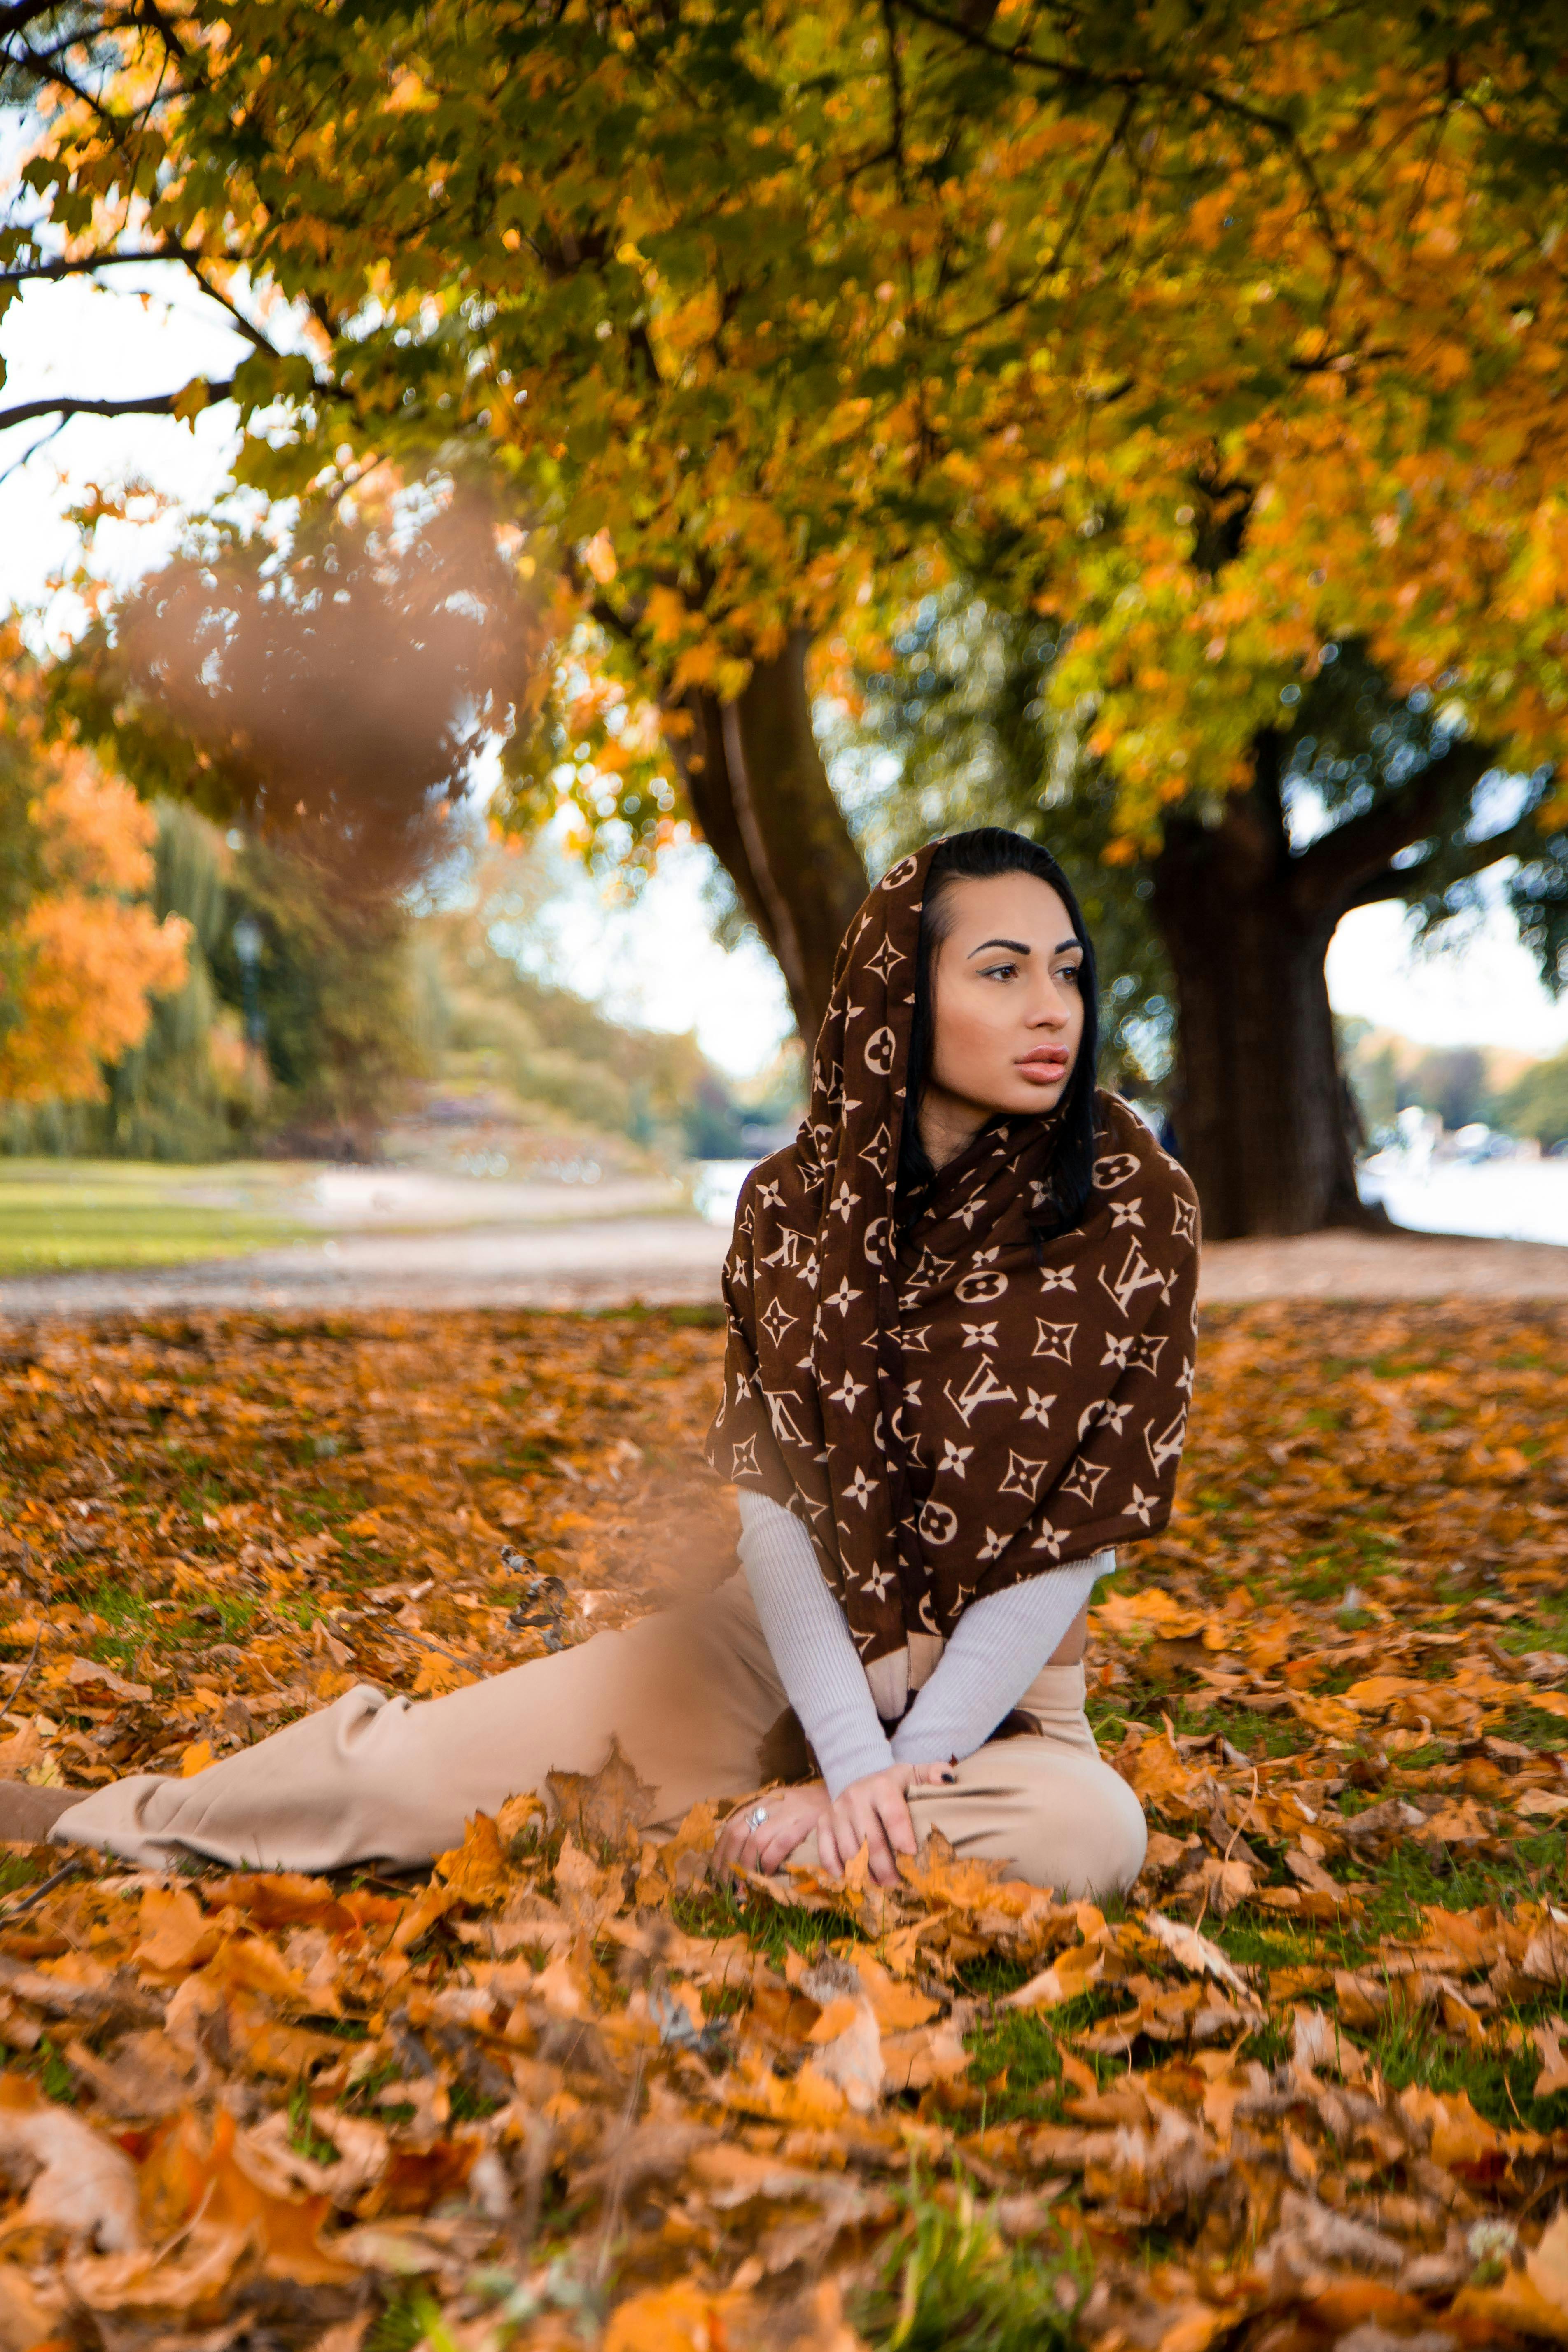 Woman with Louis Vuitton Scarf Sitting on Fallen Leaves · Free